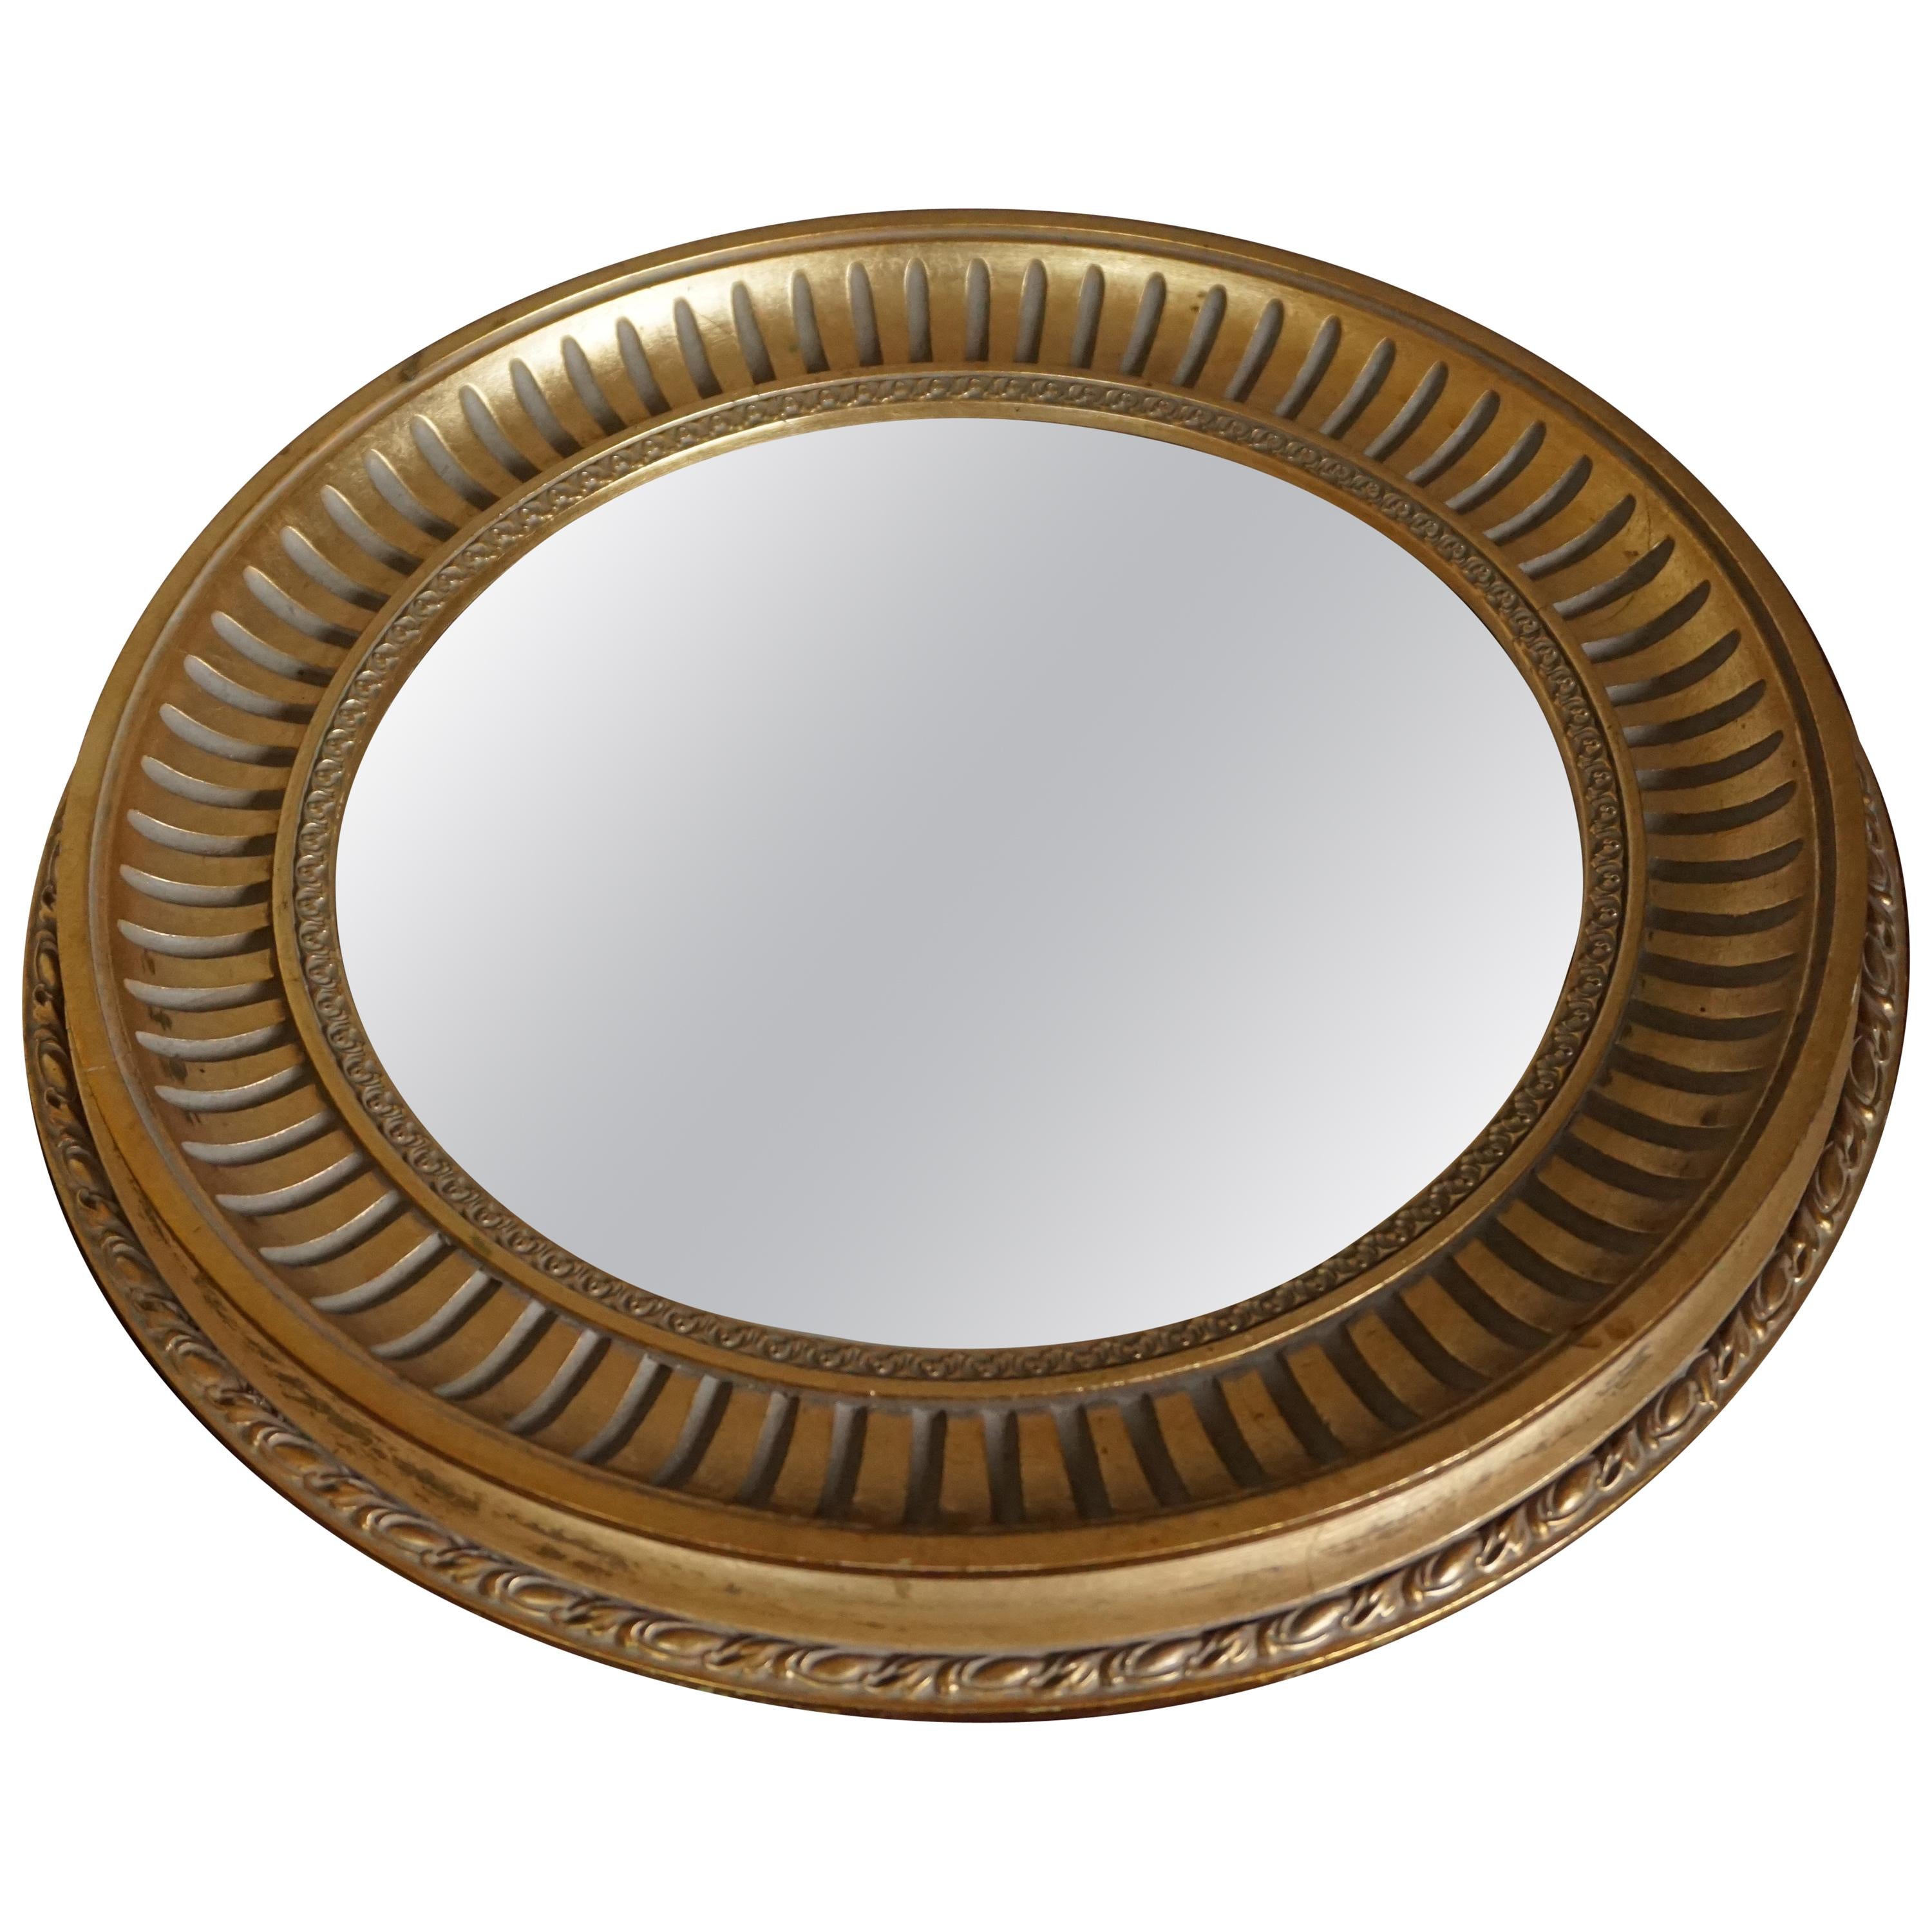 Midcentury Made Round and Gilt Convex or Butler Mirror by Compagnie Des Bronzes